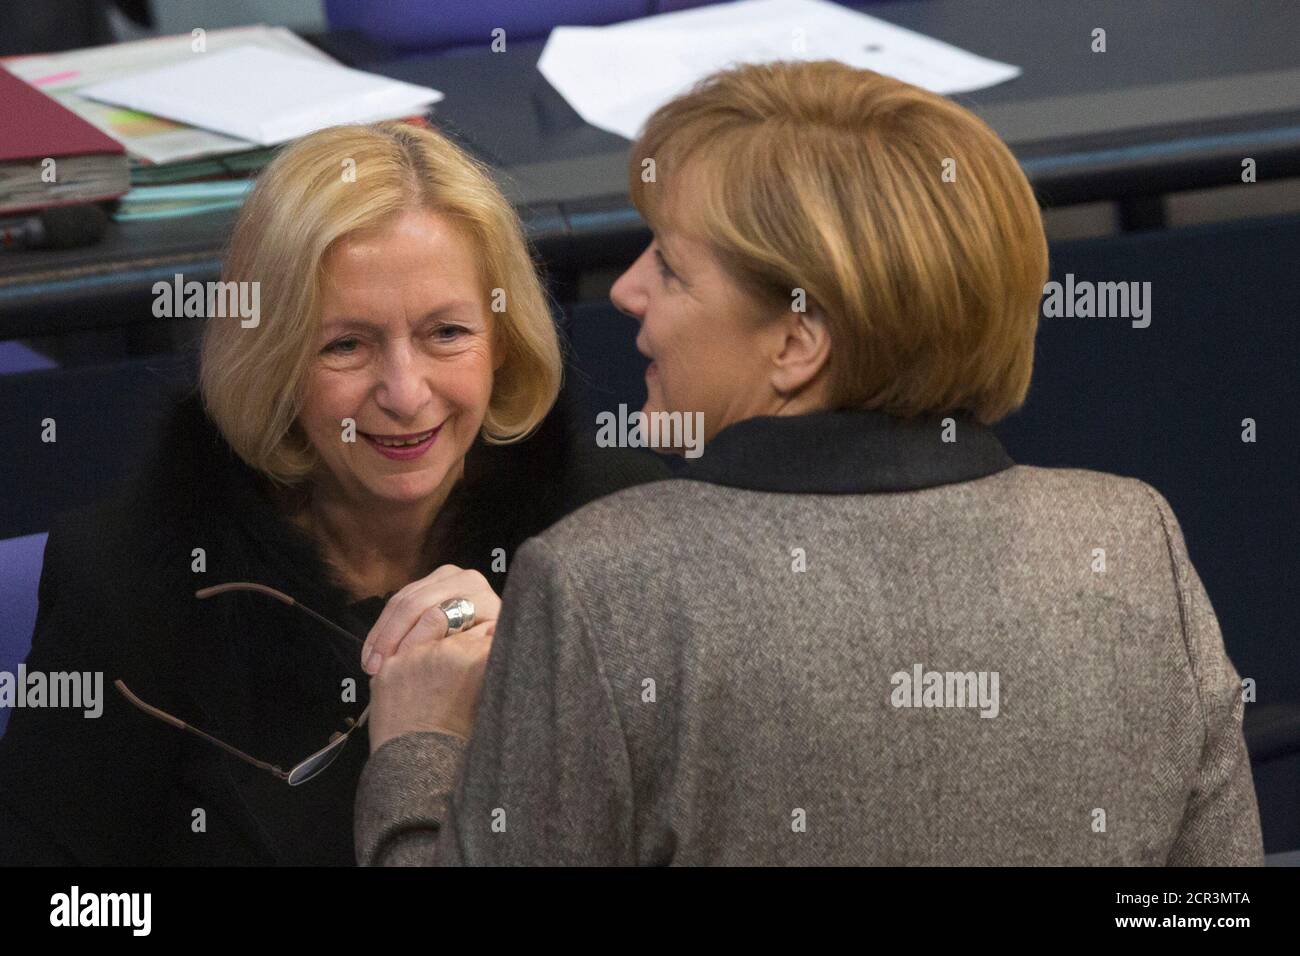 German Chancellor Angela Merkel (R) talks with the new Education Minister Johanna Wanka during a session of the Bundestag, the lower house of parliament in Berlin February 21, 2013. REUTERS/Thomas Peter  (GERMANY - Tags: POLITICS) Stock Photo